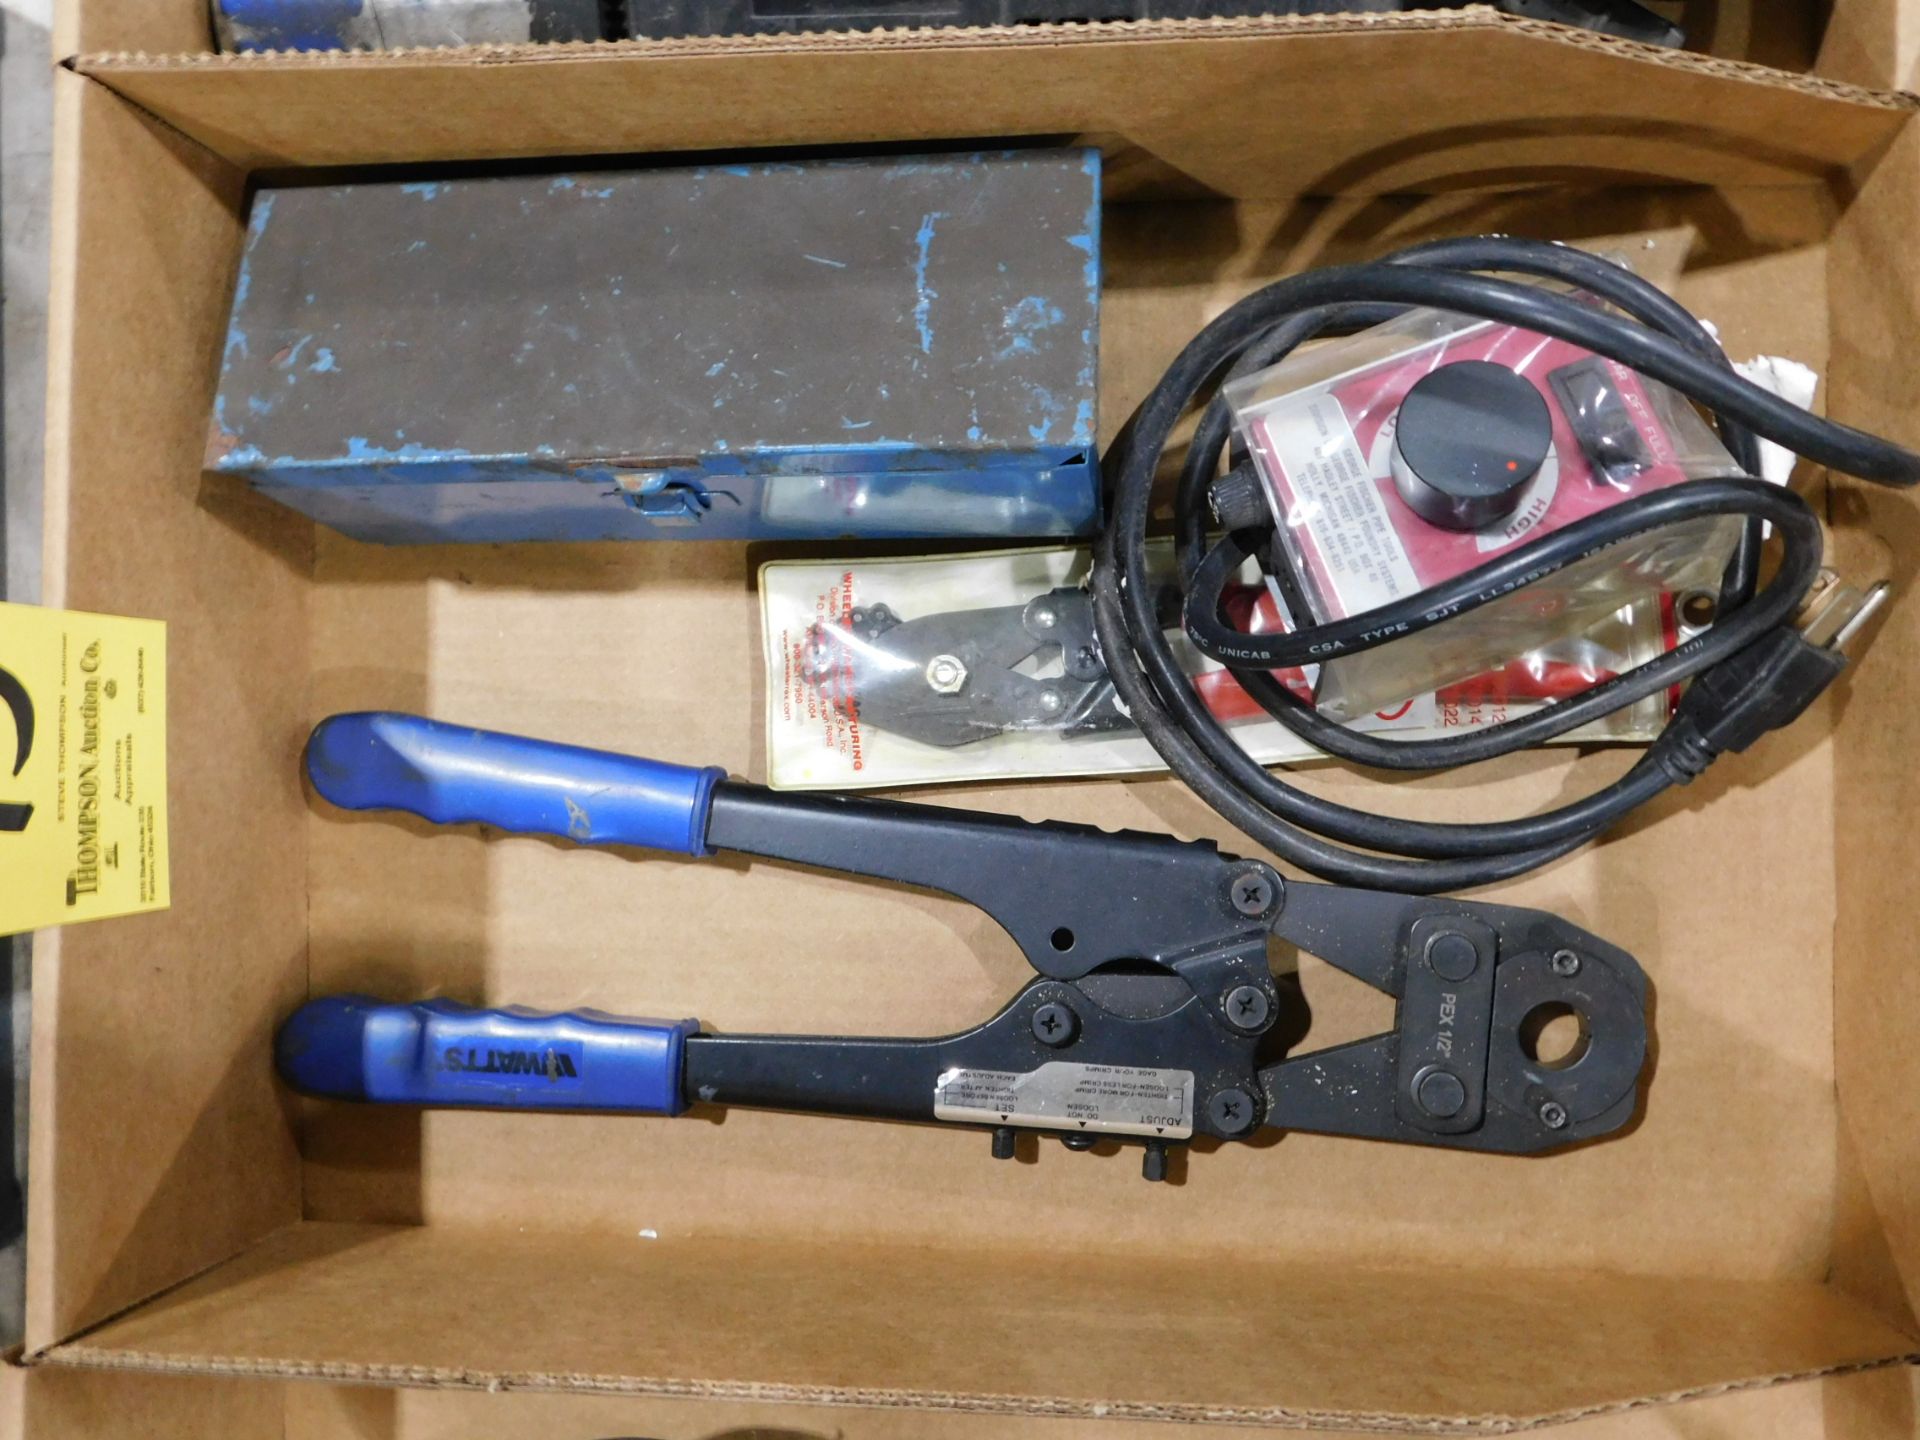 Crimping Tools, Spearhead Gasket Cutter, and Variable Speed Control